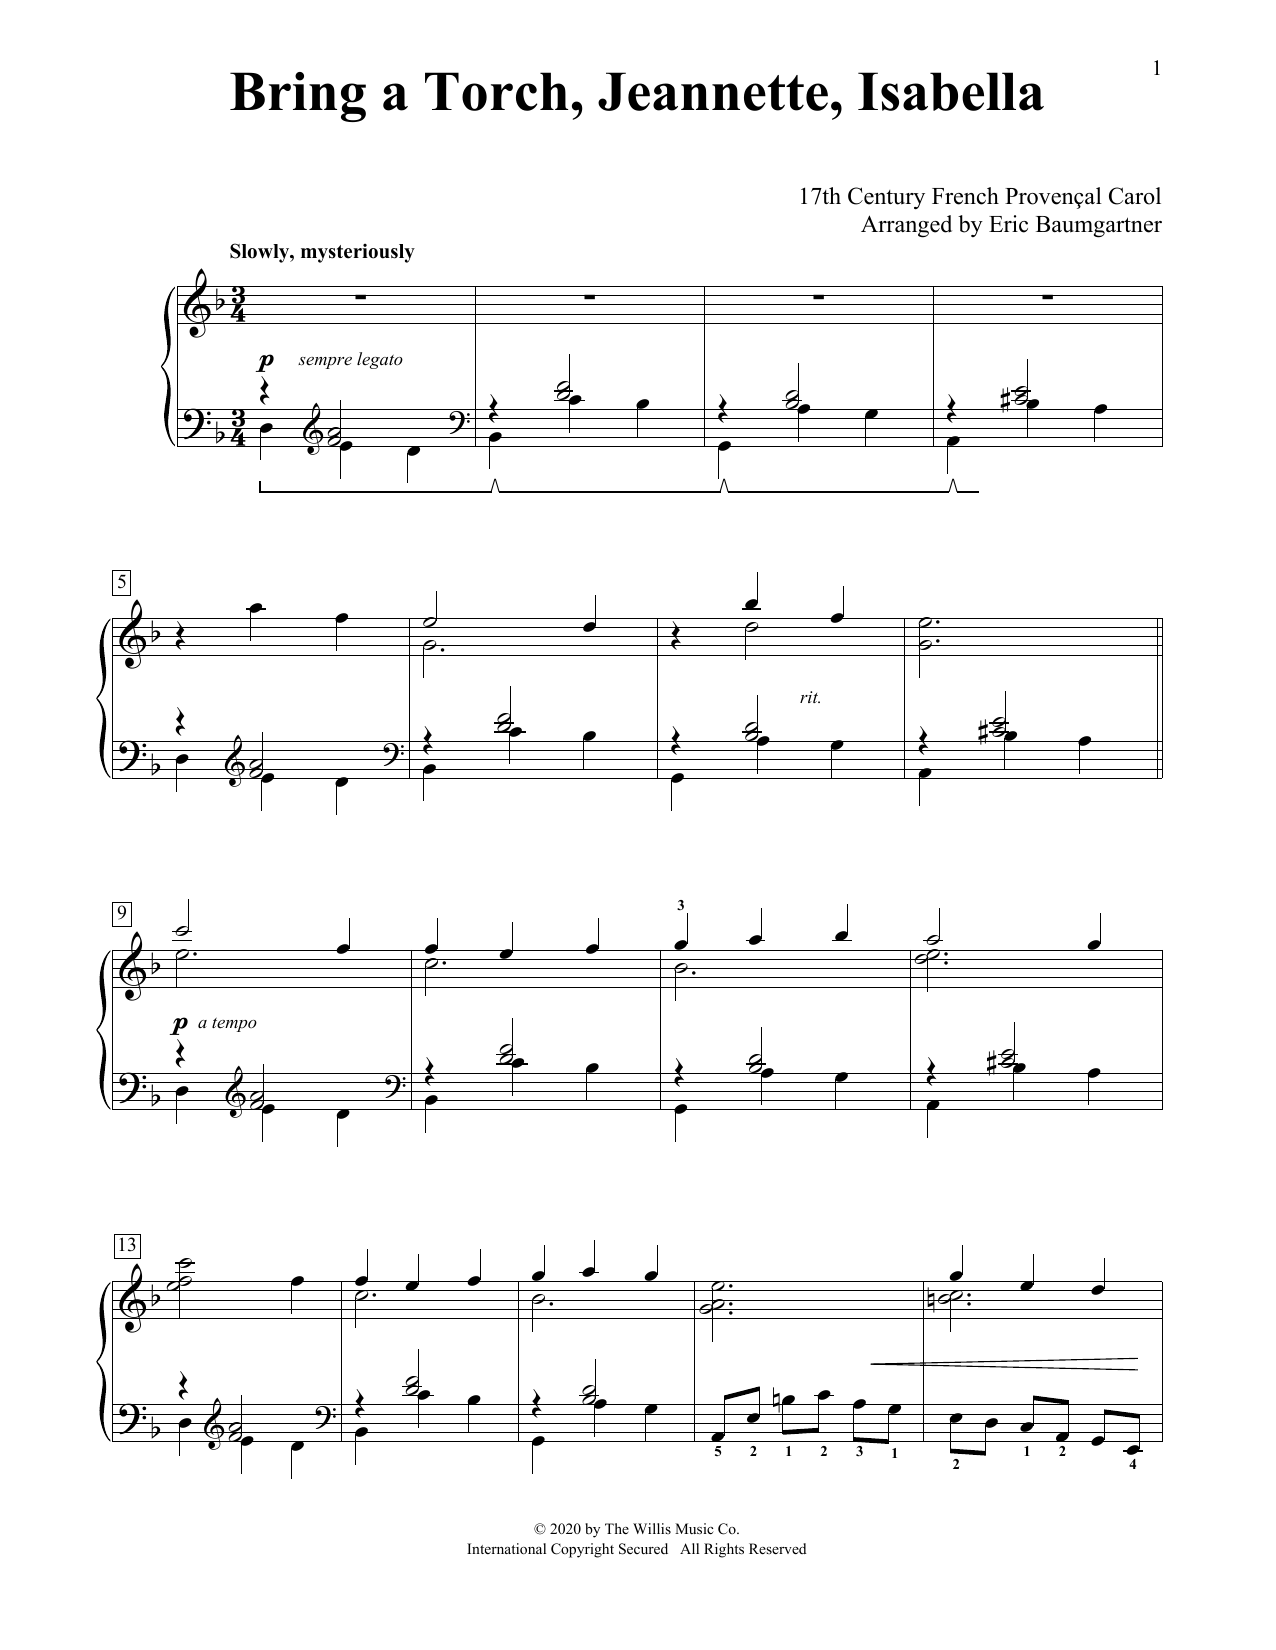 Download 17th Century French Carol Bring A Torch, Jeannette, Isabella [Jaz Sheet Music